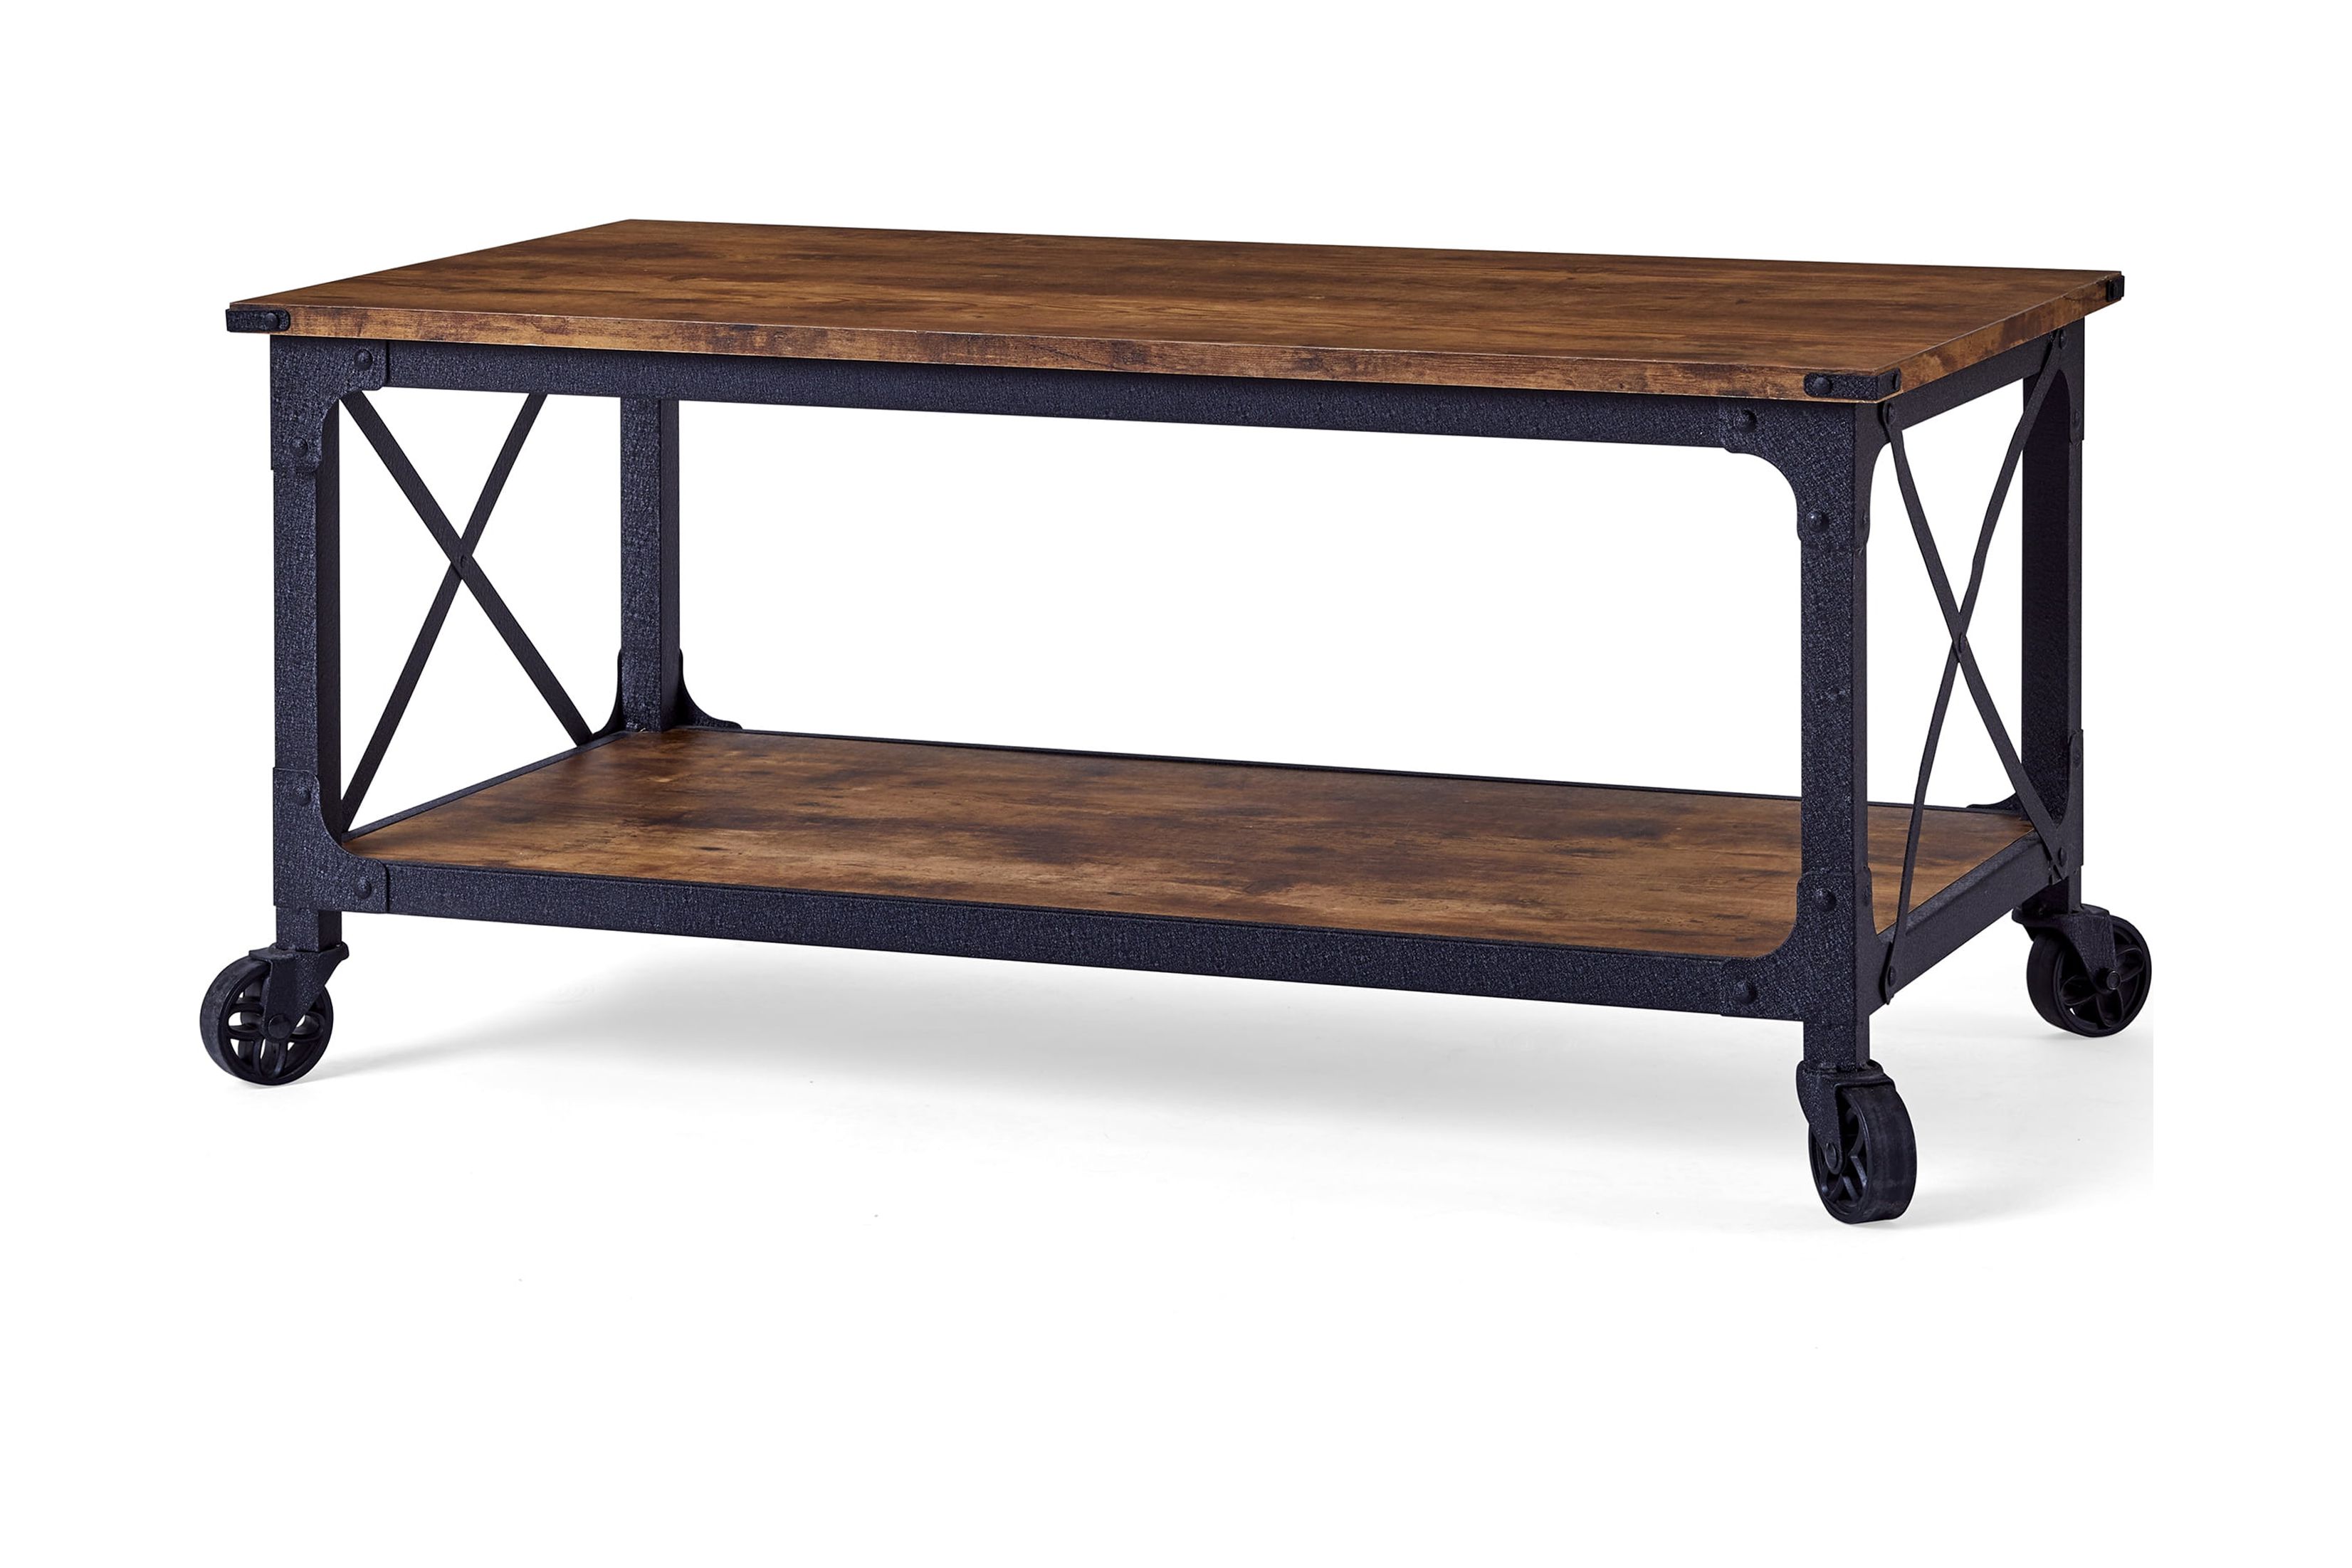 Better Homes & Gardens Rustic Country Coffee Table, Weathered Pine Finish - image 4 of 8